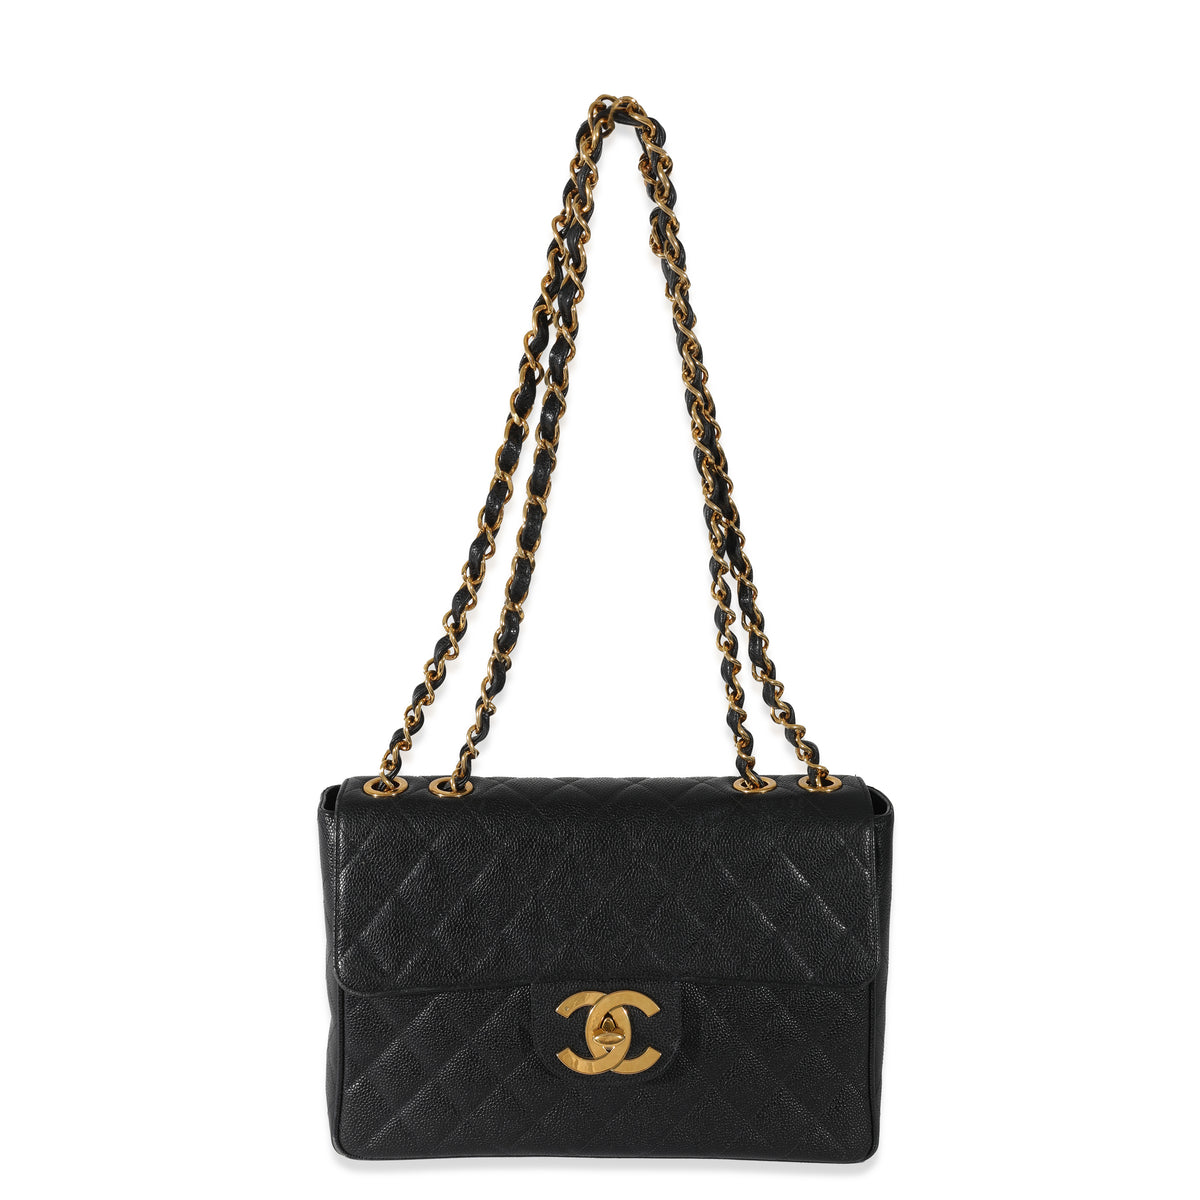 Chanel Rare Horizontal Quilted Black XL Jumbo Flap 24K Plated GHW 1CK0301